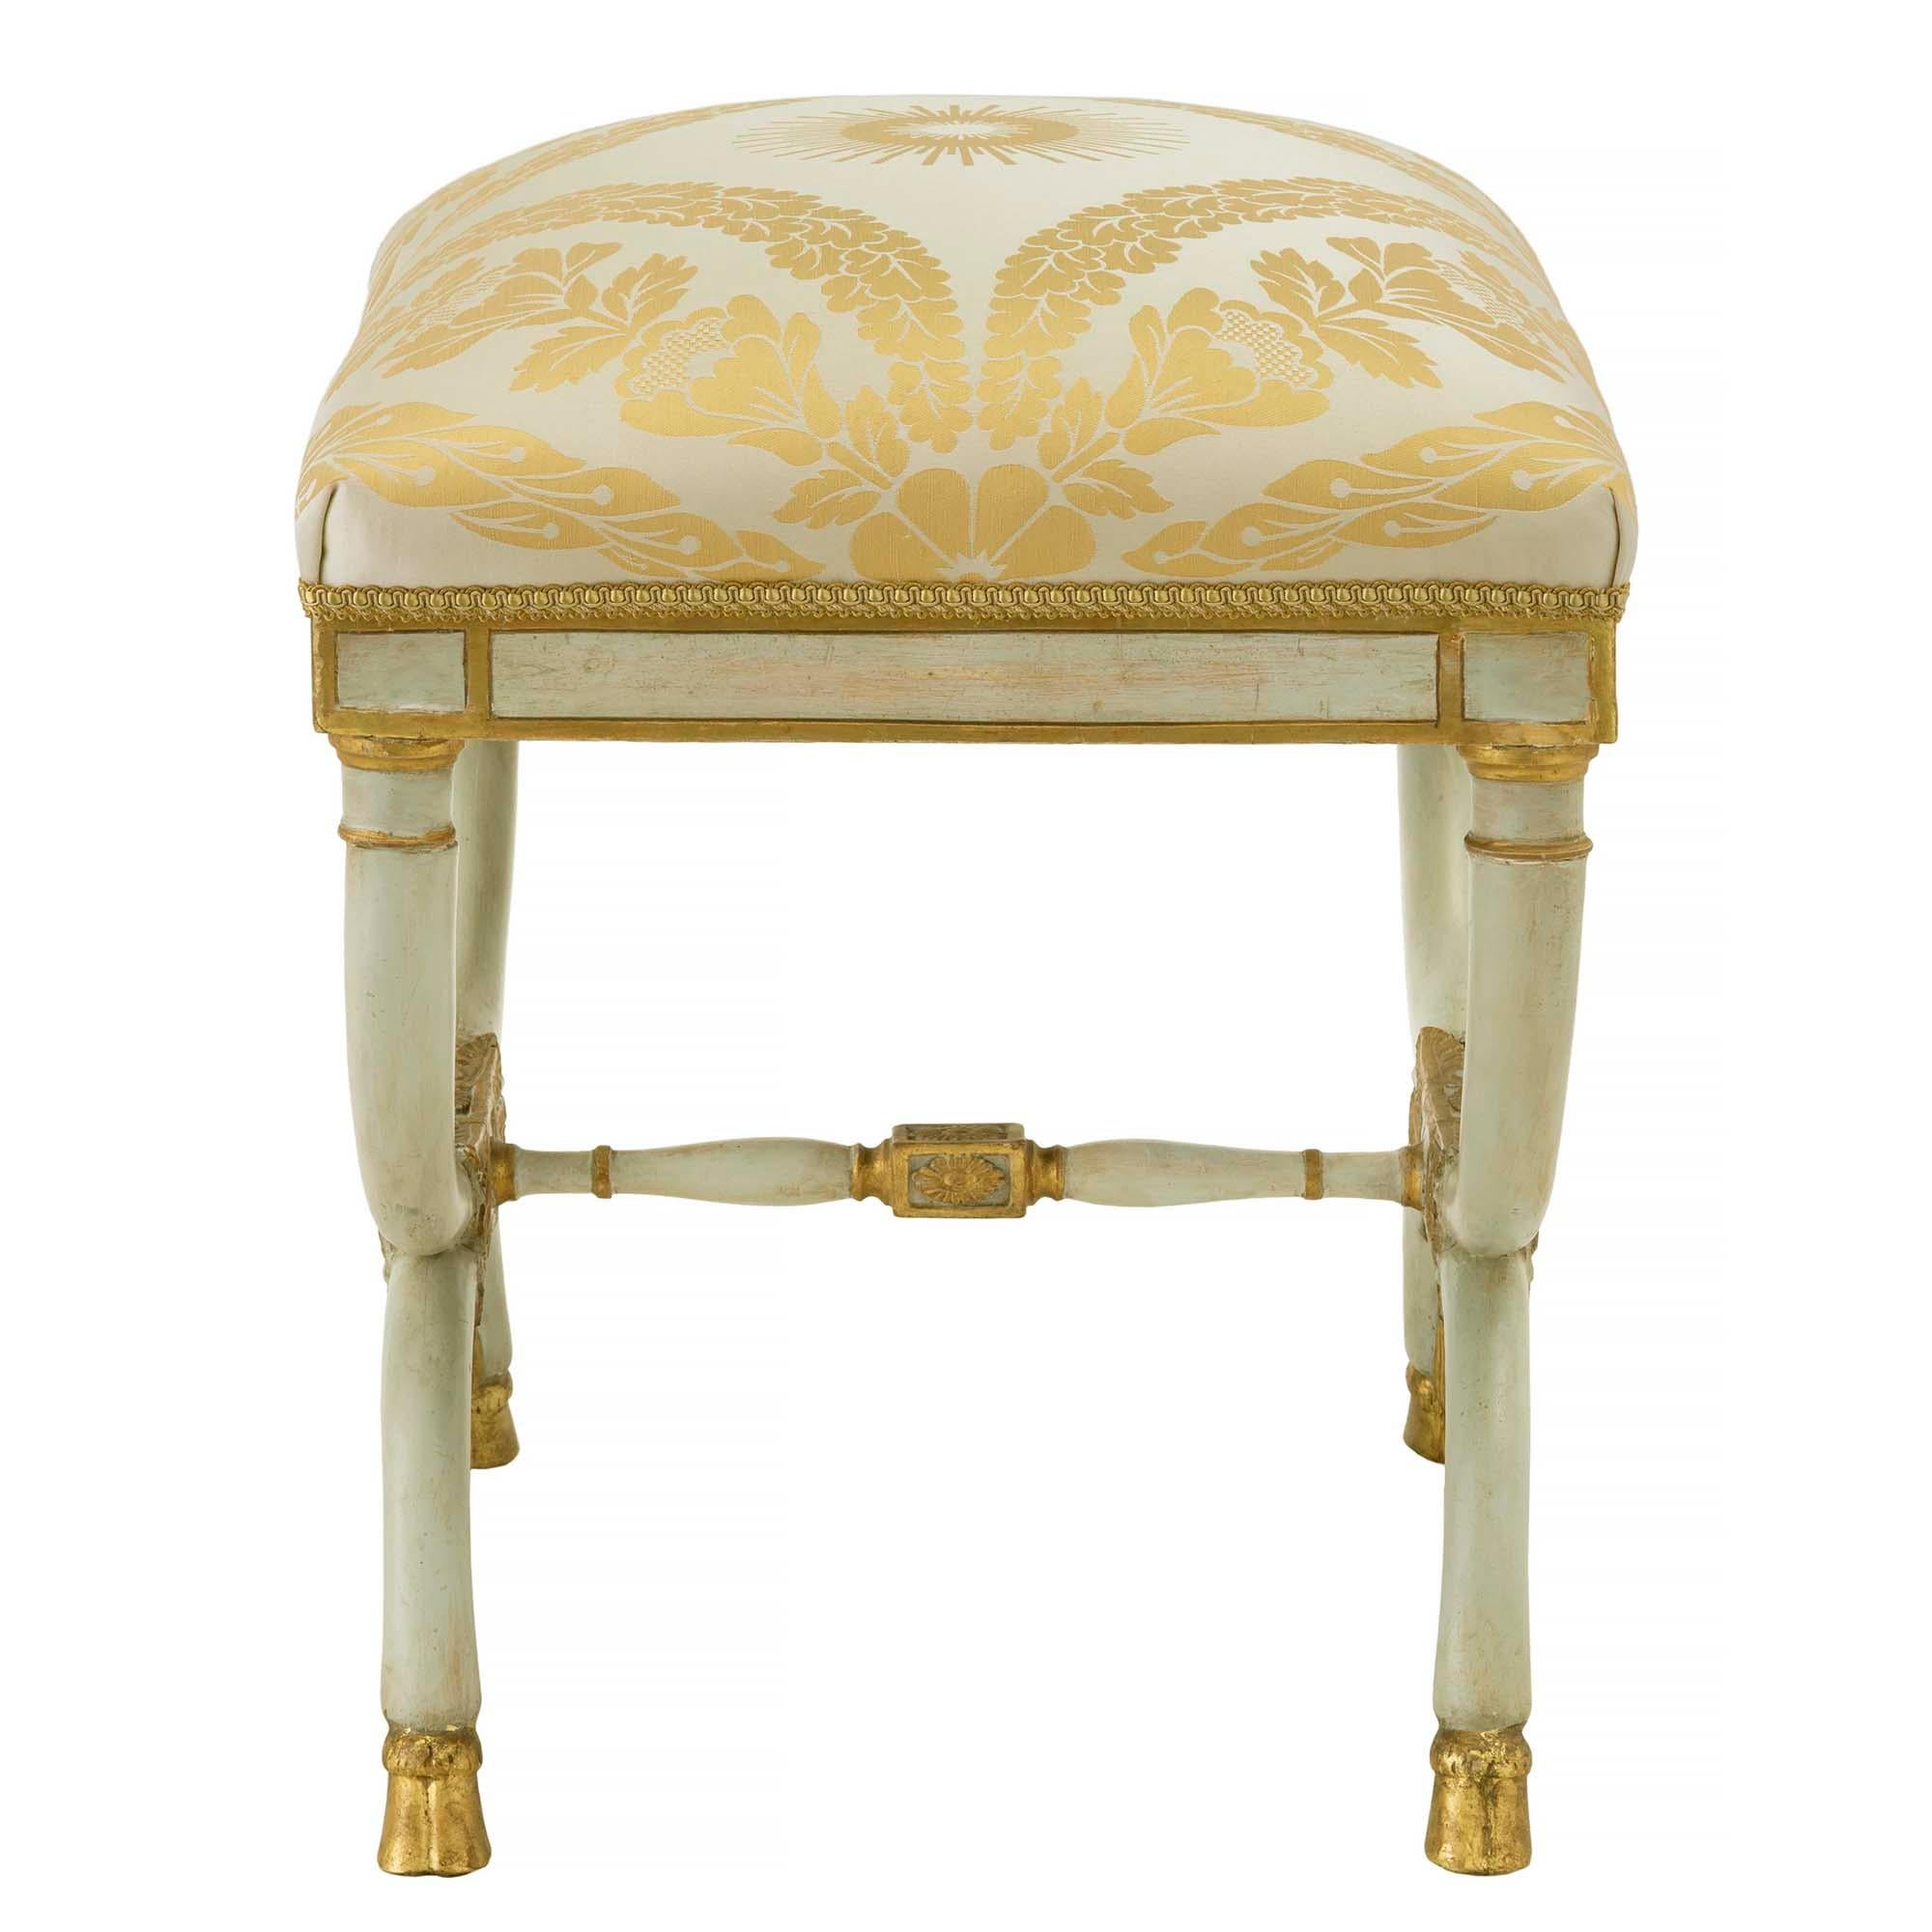 Giltwood Pair of Italian Early 19th Century Neoclassical Style Patinated and Gilt Benches For Sale